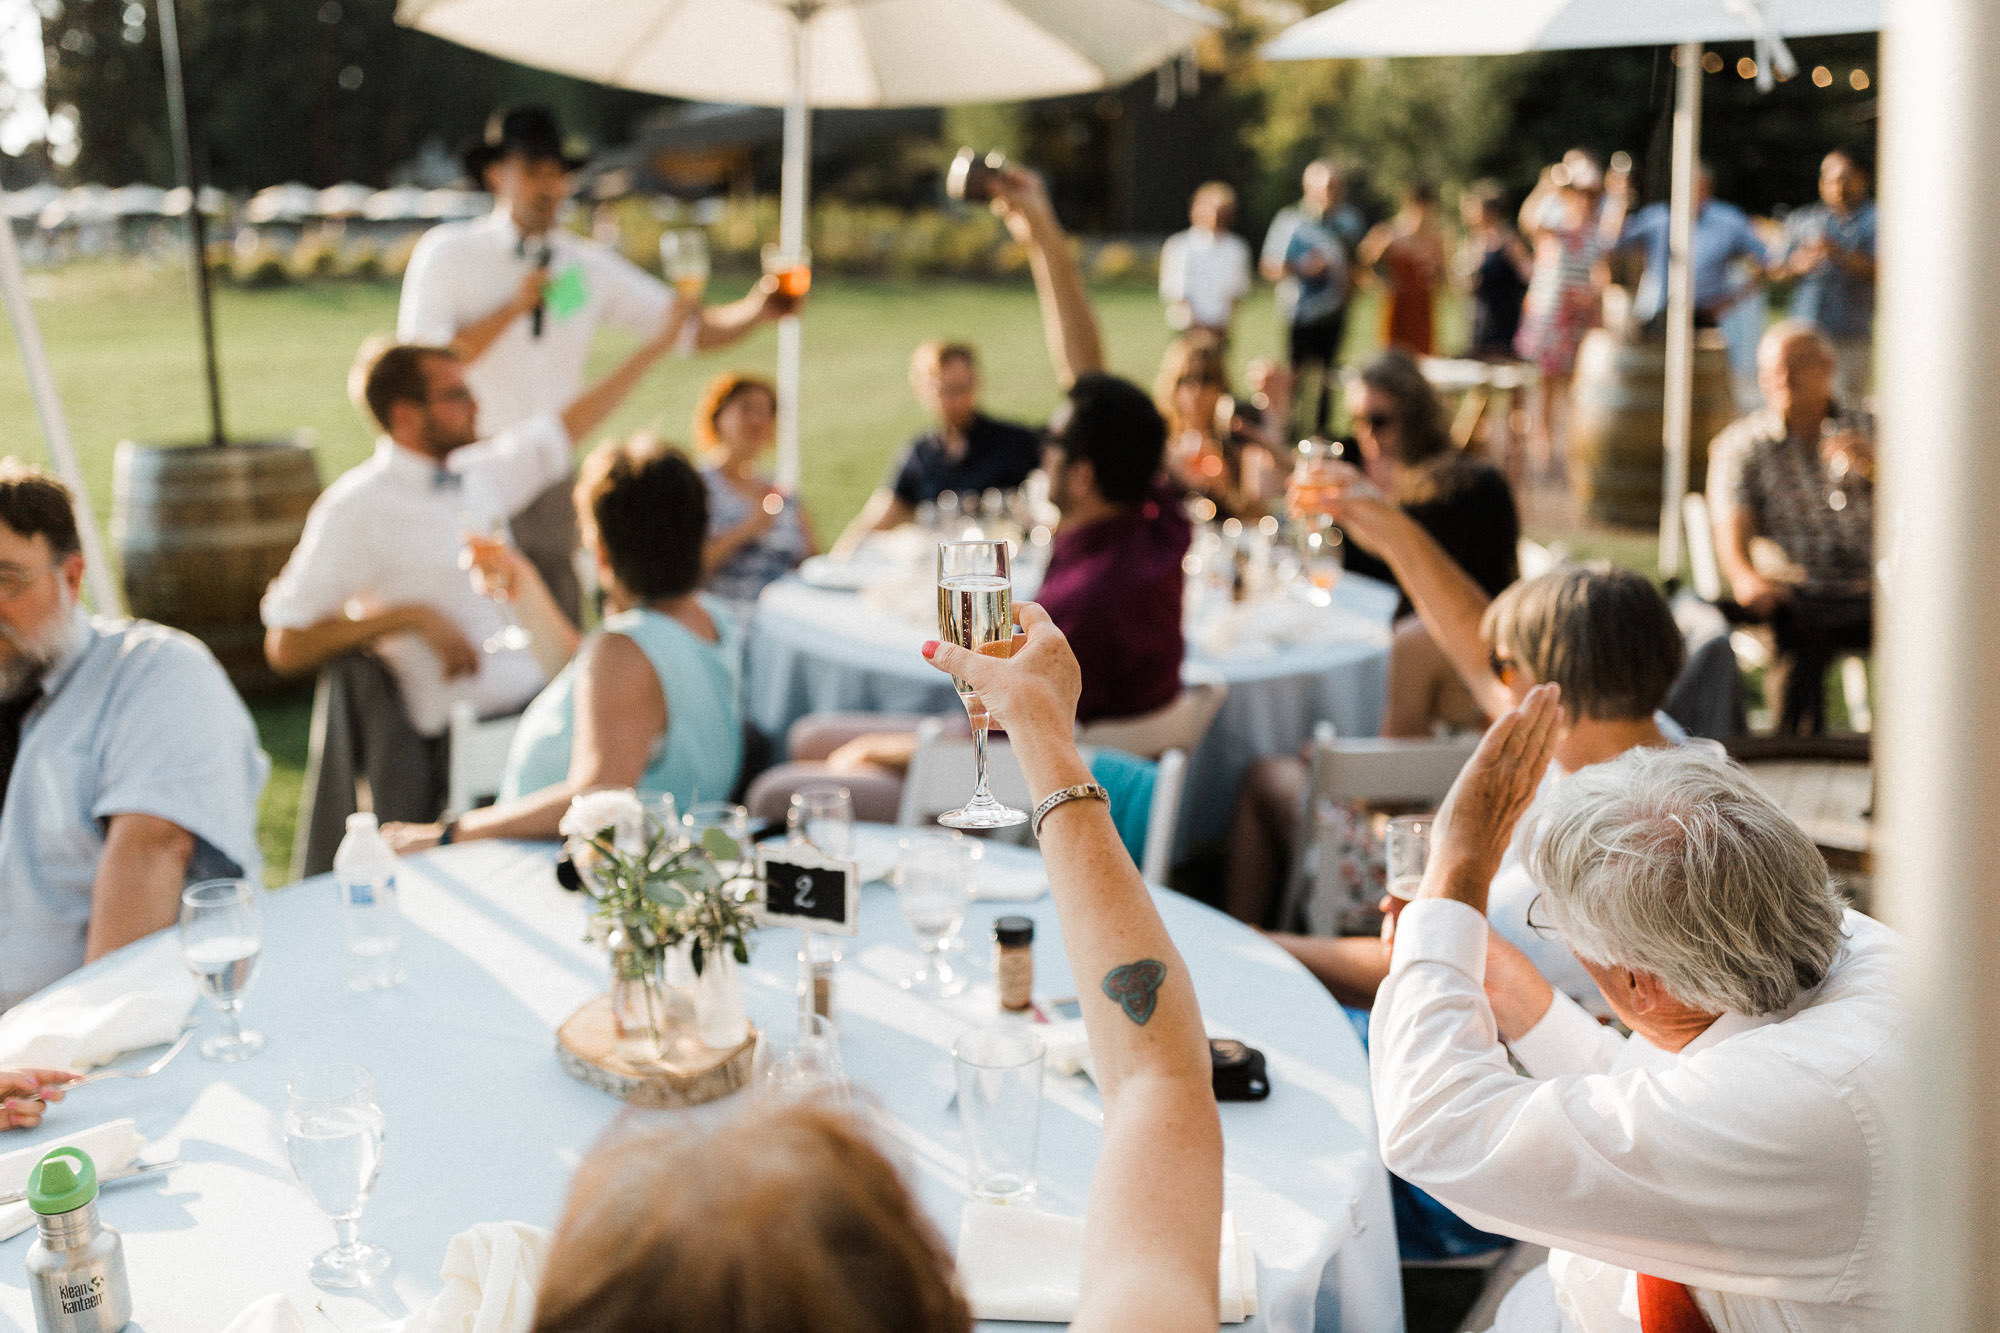 Guests lift their glasses during toasts at a Black Butte Ranch wedding